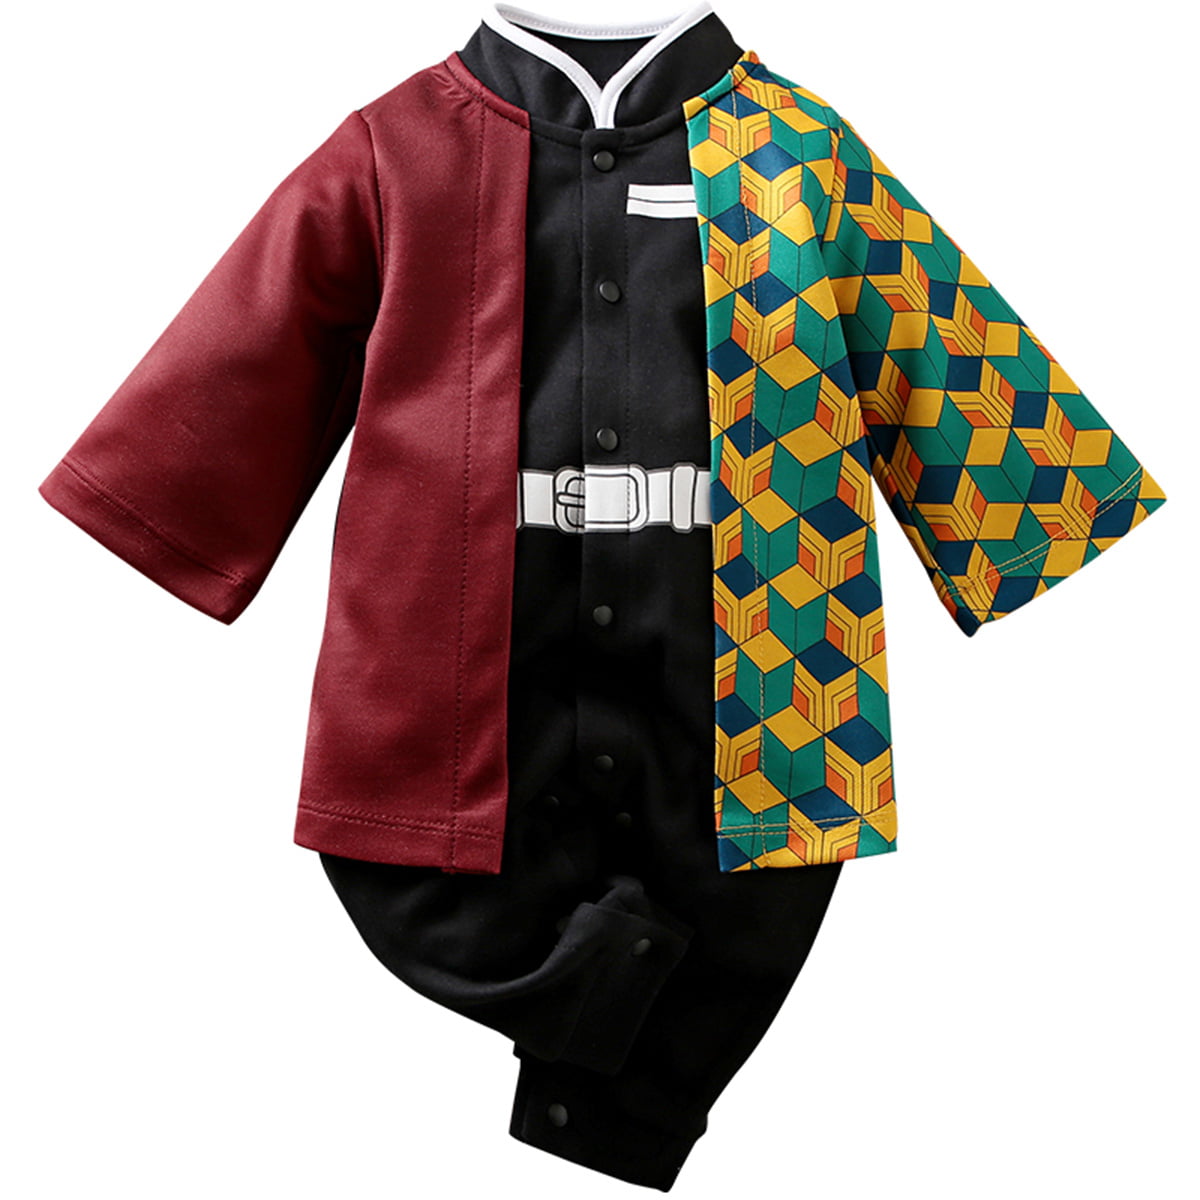 RELABTABY Newborn Baby Boys Girls Anime Romper Cotton Long Sleeve Infant Cosplay Costume Jumpsuit Outfit 